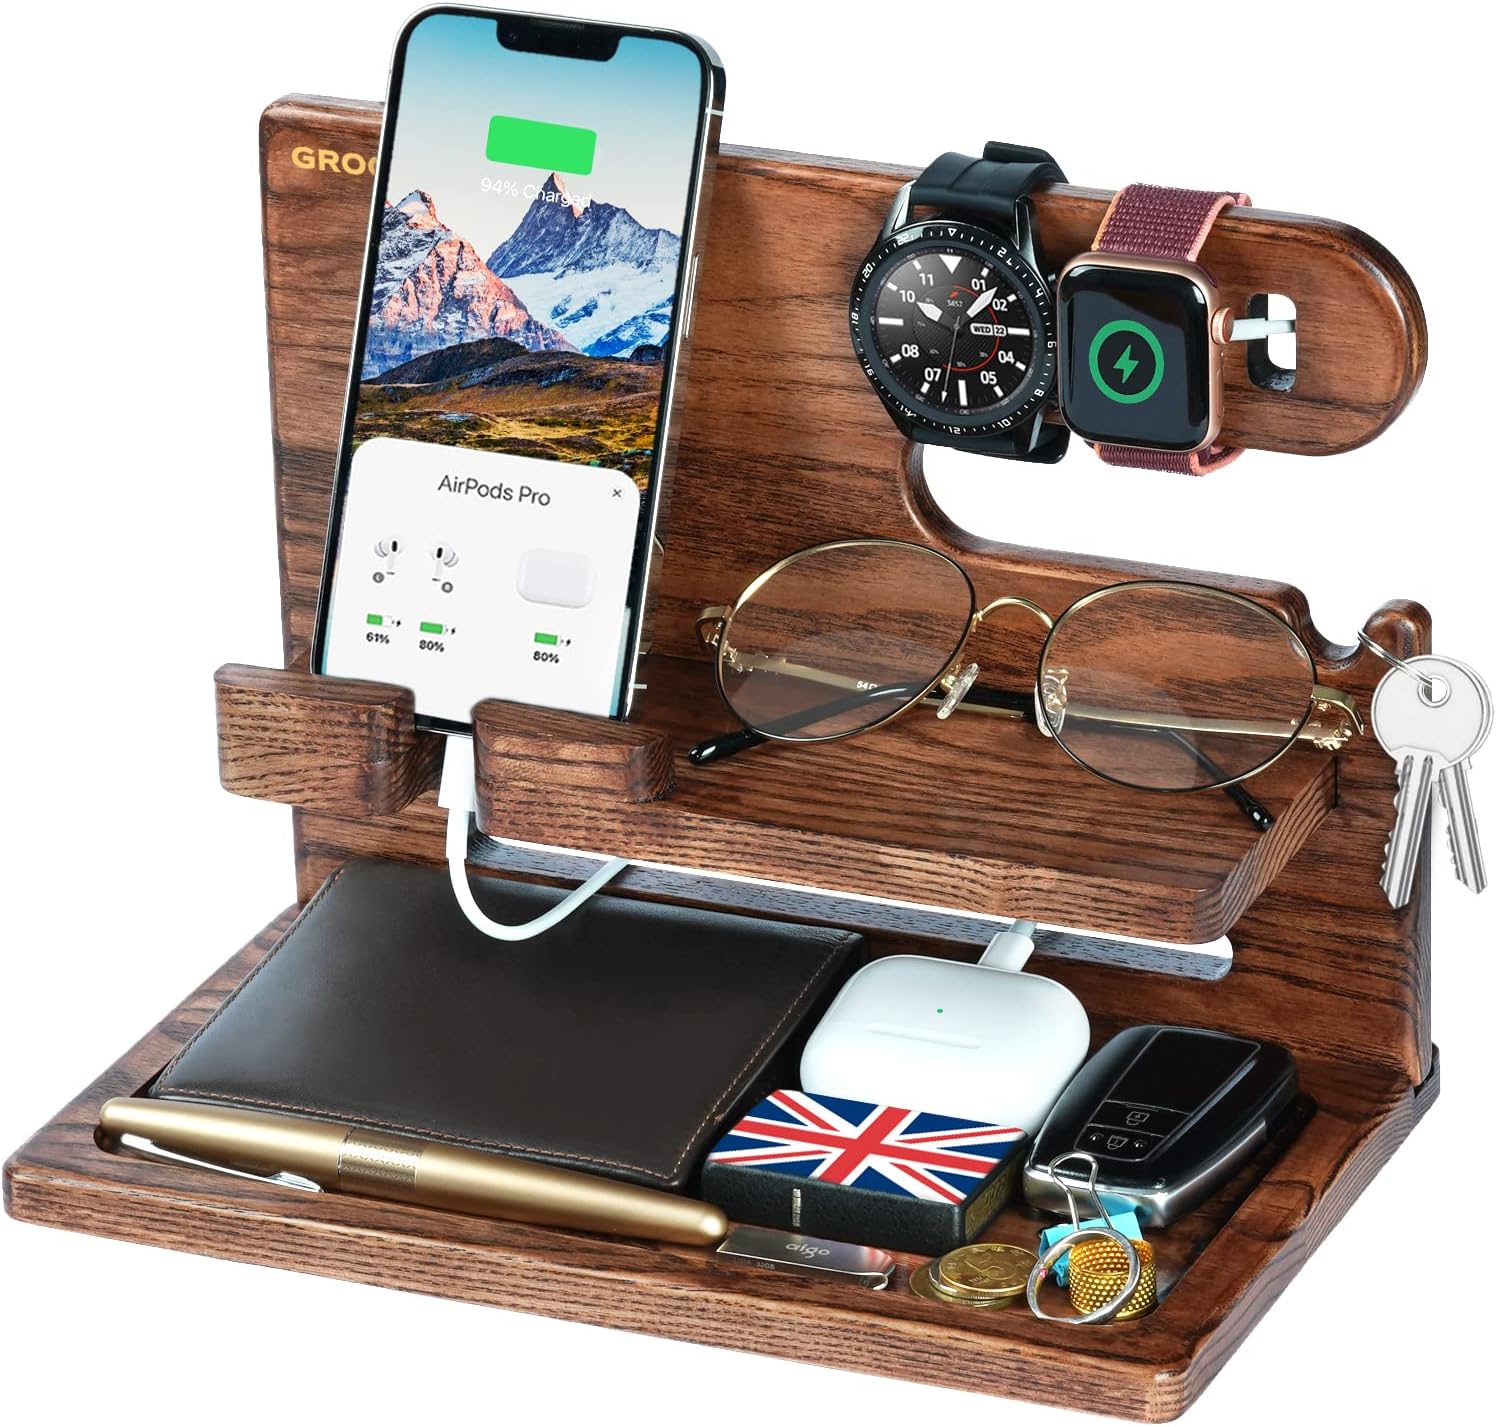 Gifts for Men Him Bedside Organiser, Birthday Gifts Ideas for Dad Daddy Grandad from Daughter Son, Ash Wooden Phone Docking Station Anniversary Christmas Presents for Men Women Husband Boyfriend